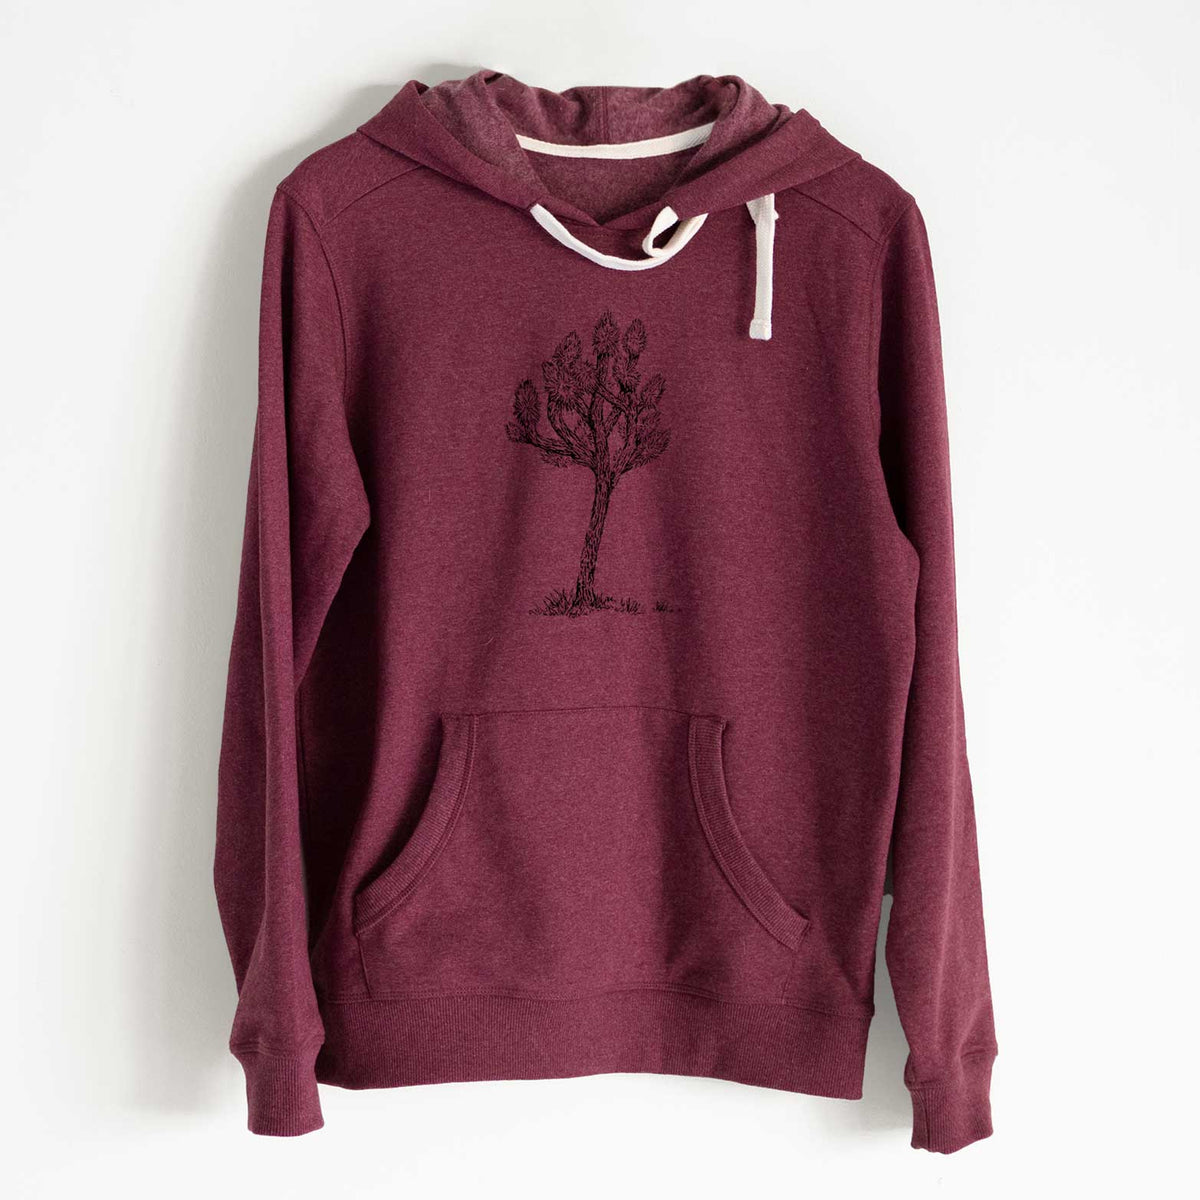 Yucca brevifolia - Joshua Tree - Unisex Recycled Hoodie - CLOSEOUT - FINAL SALE